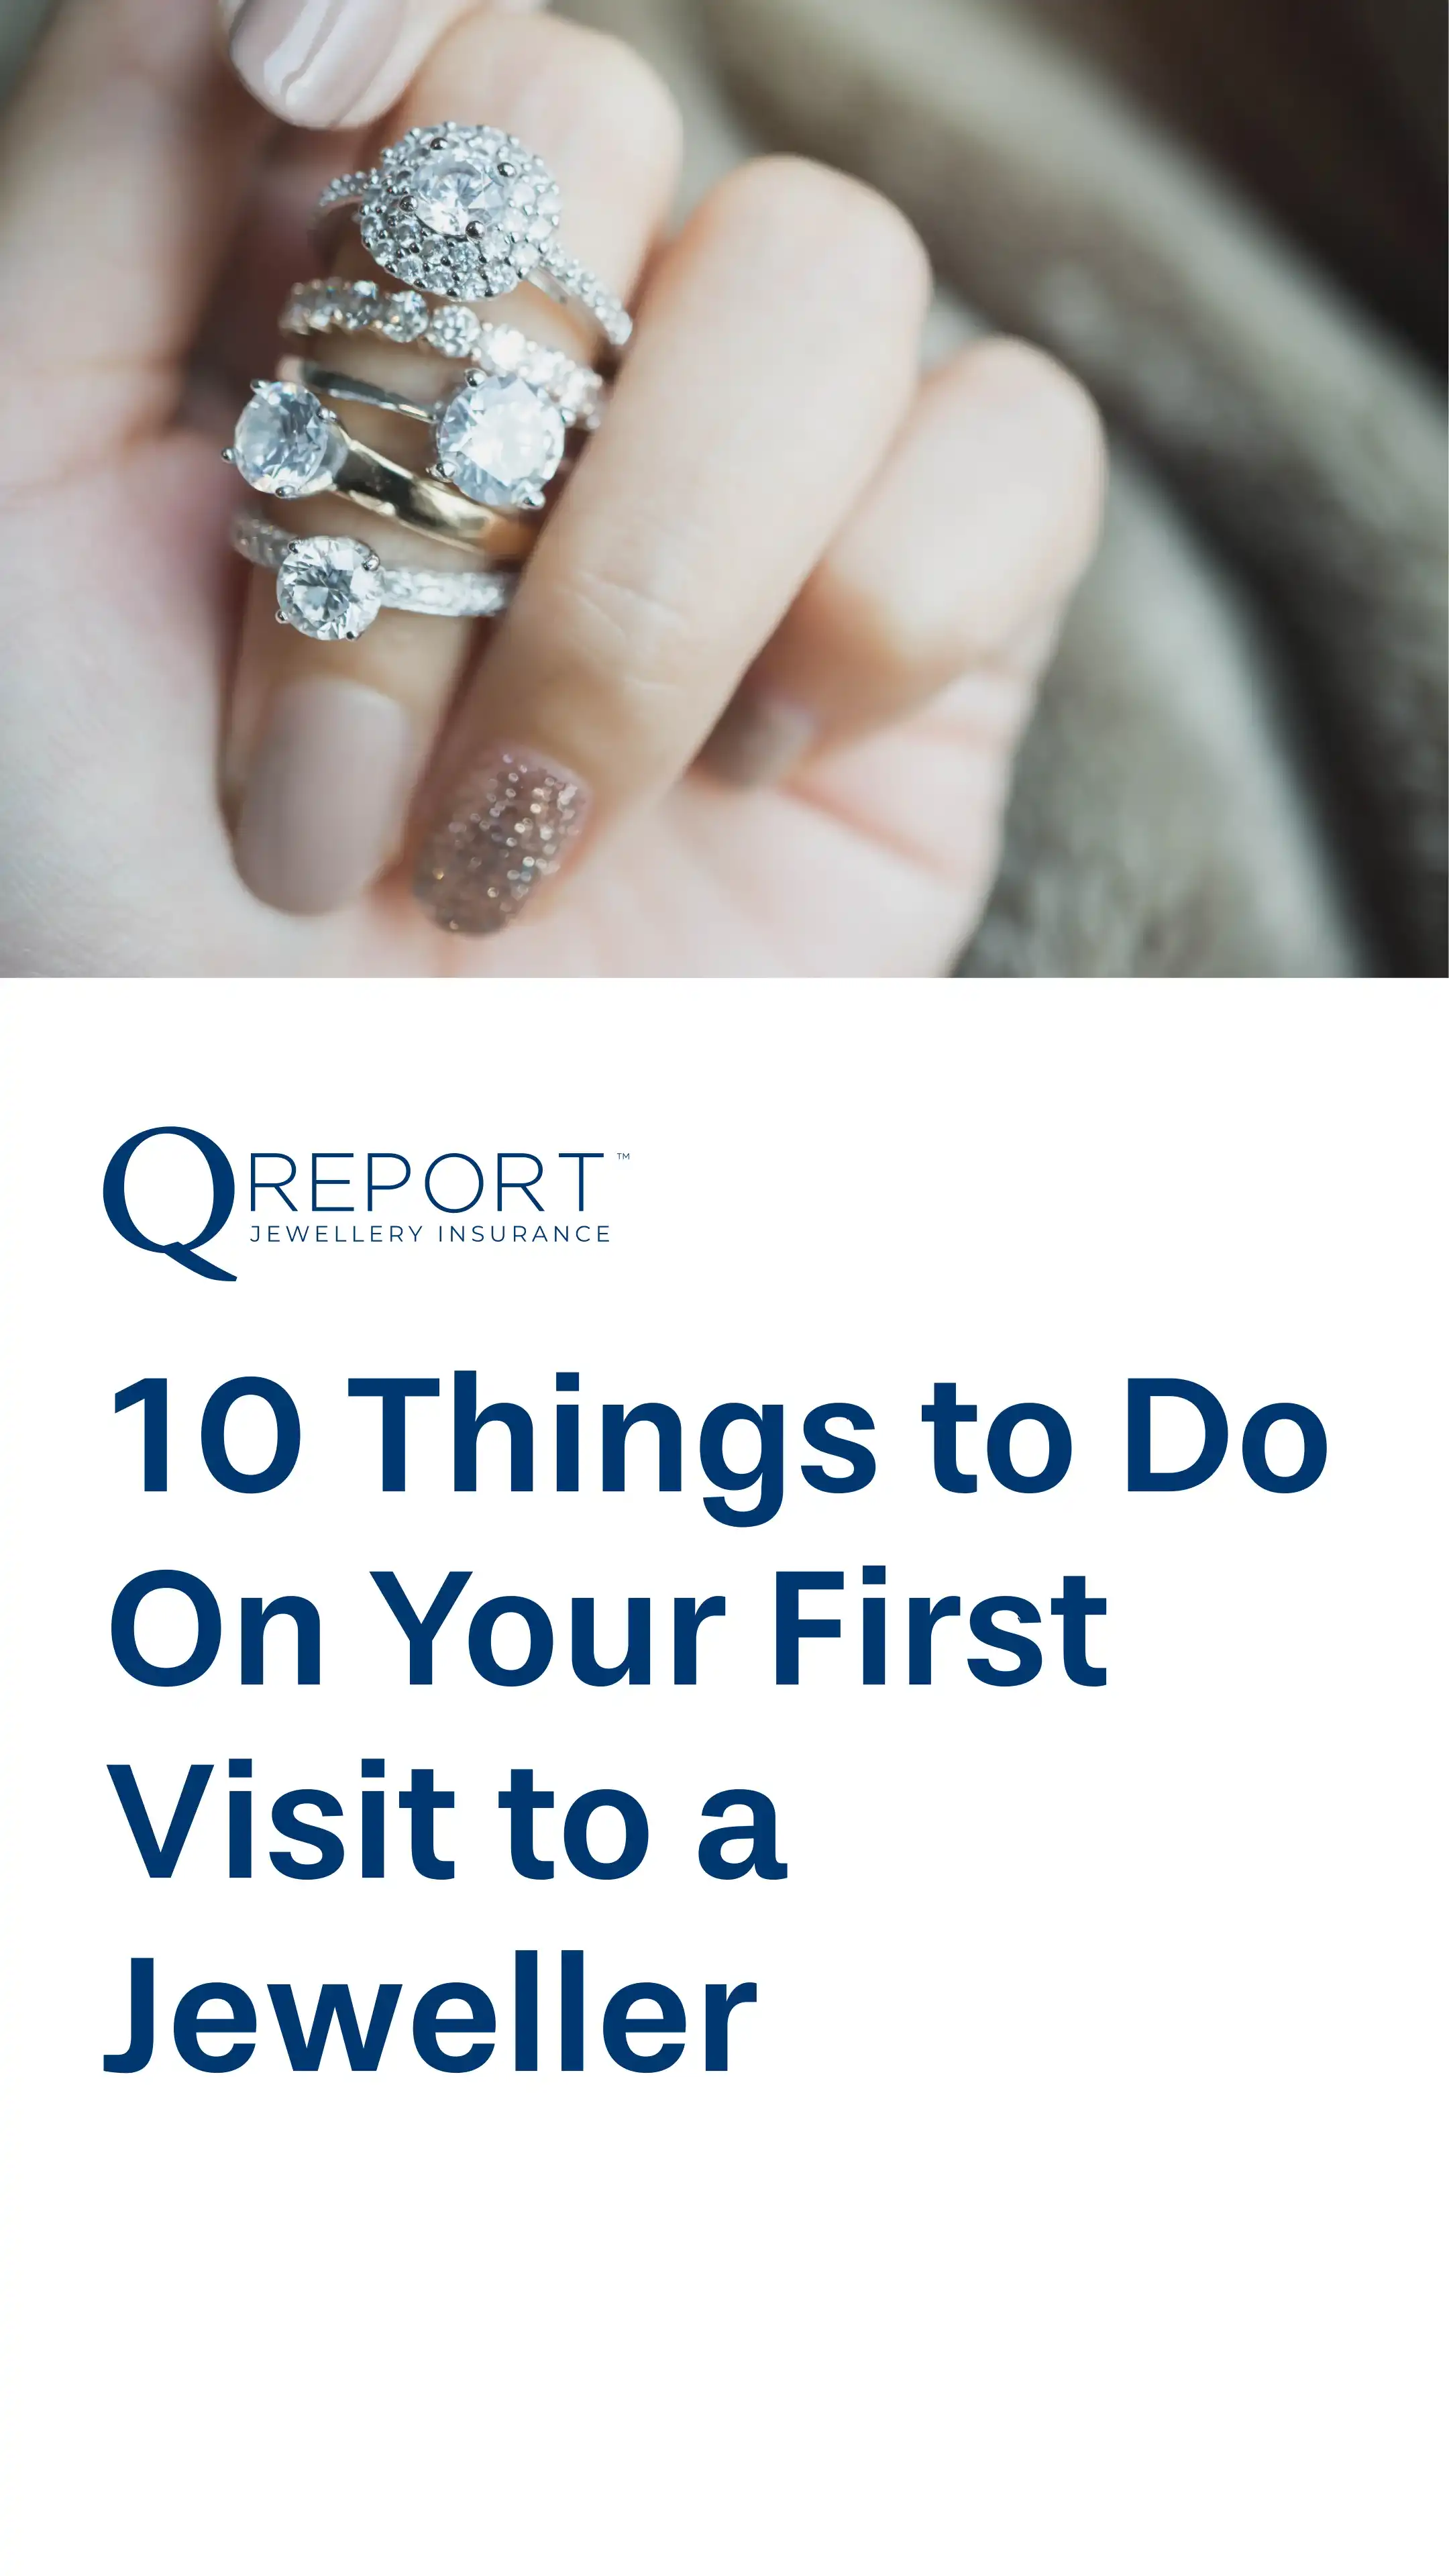 10 Things to Do On Your First Visit to a Jeweller